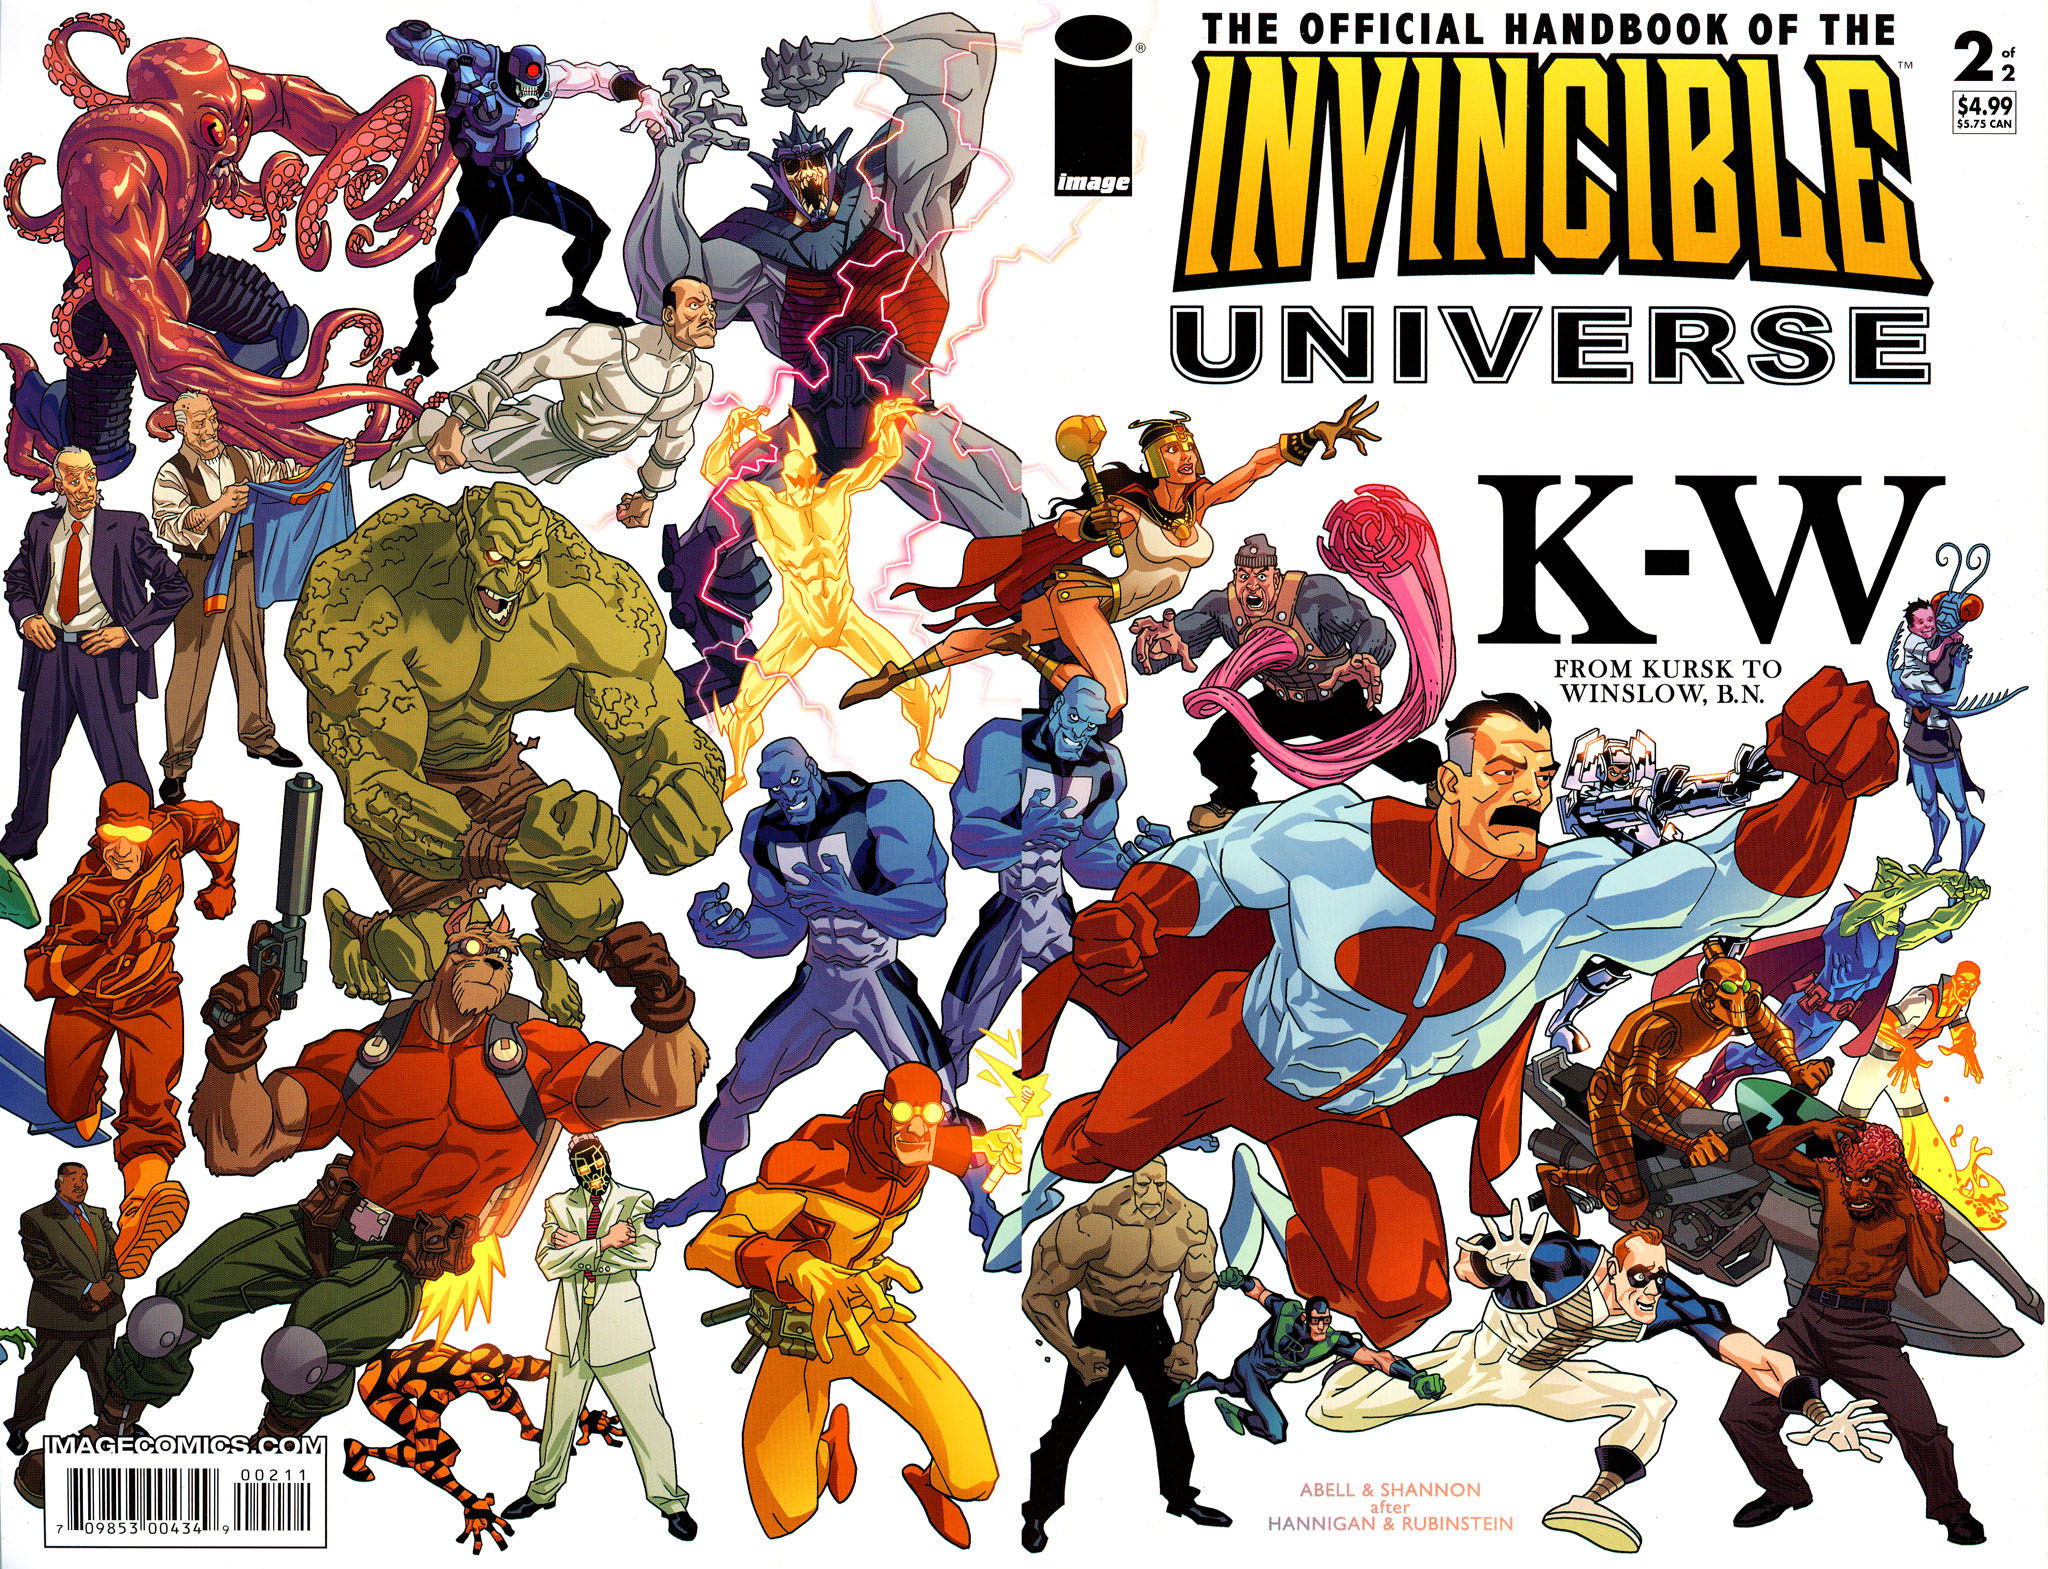 Read online The Official Handbook of the Invincible Universe comic -  Issue #2 - 1